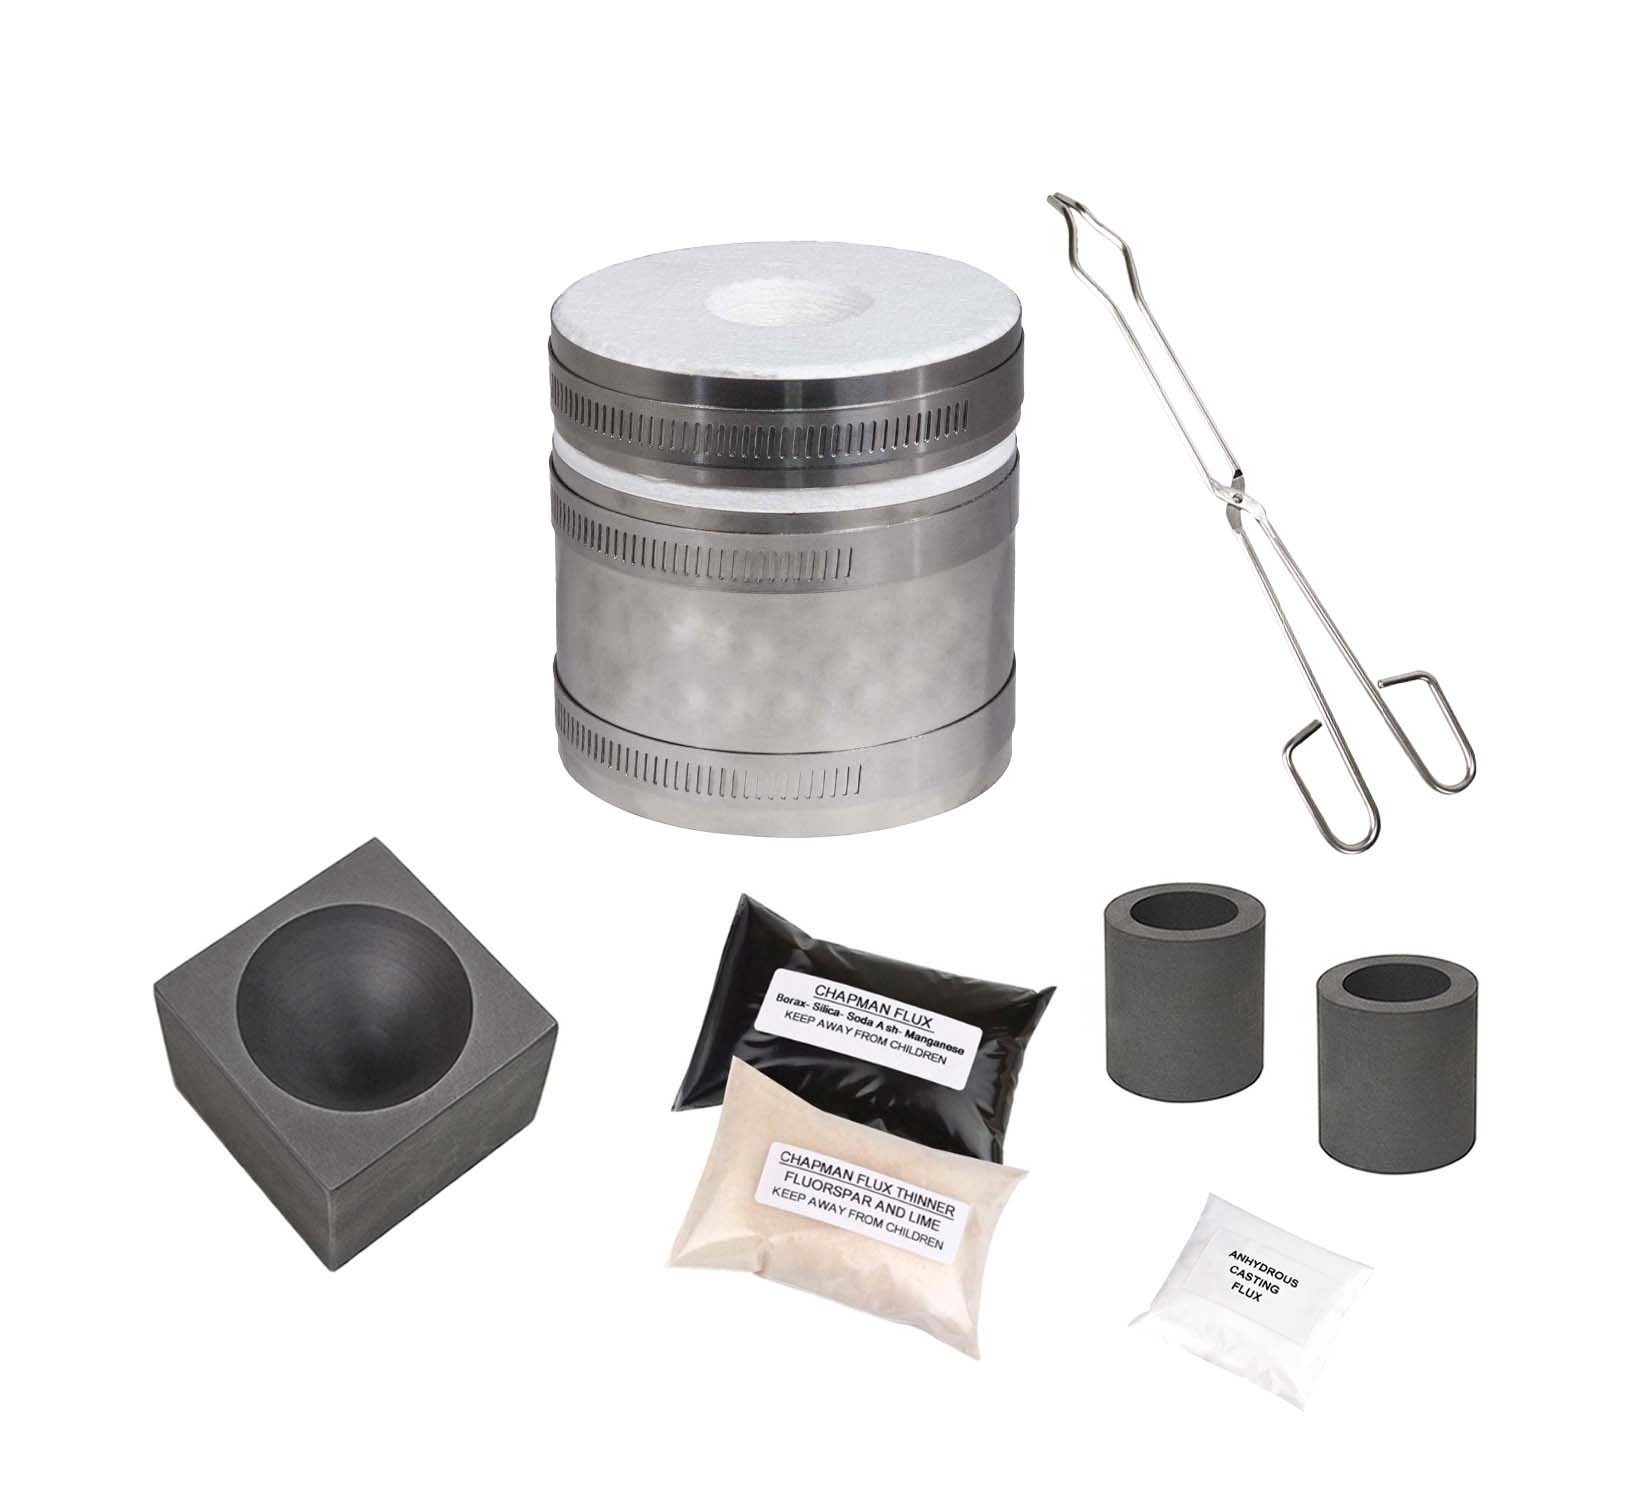 Smelting Mold Weld Kit - Melting Mold - Made from Steel - 4 x 4